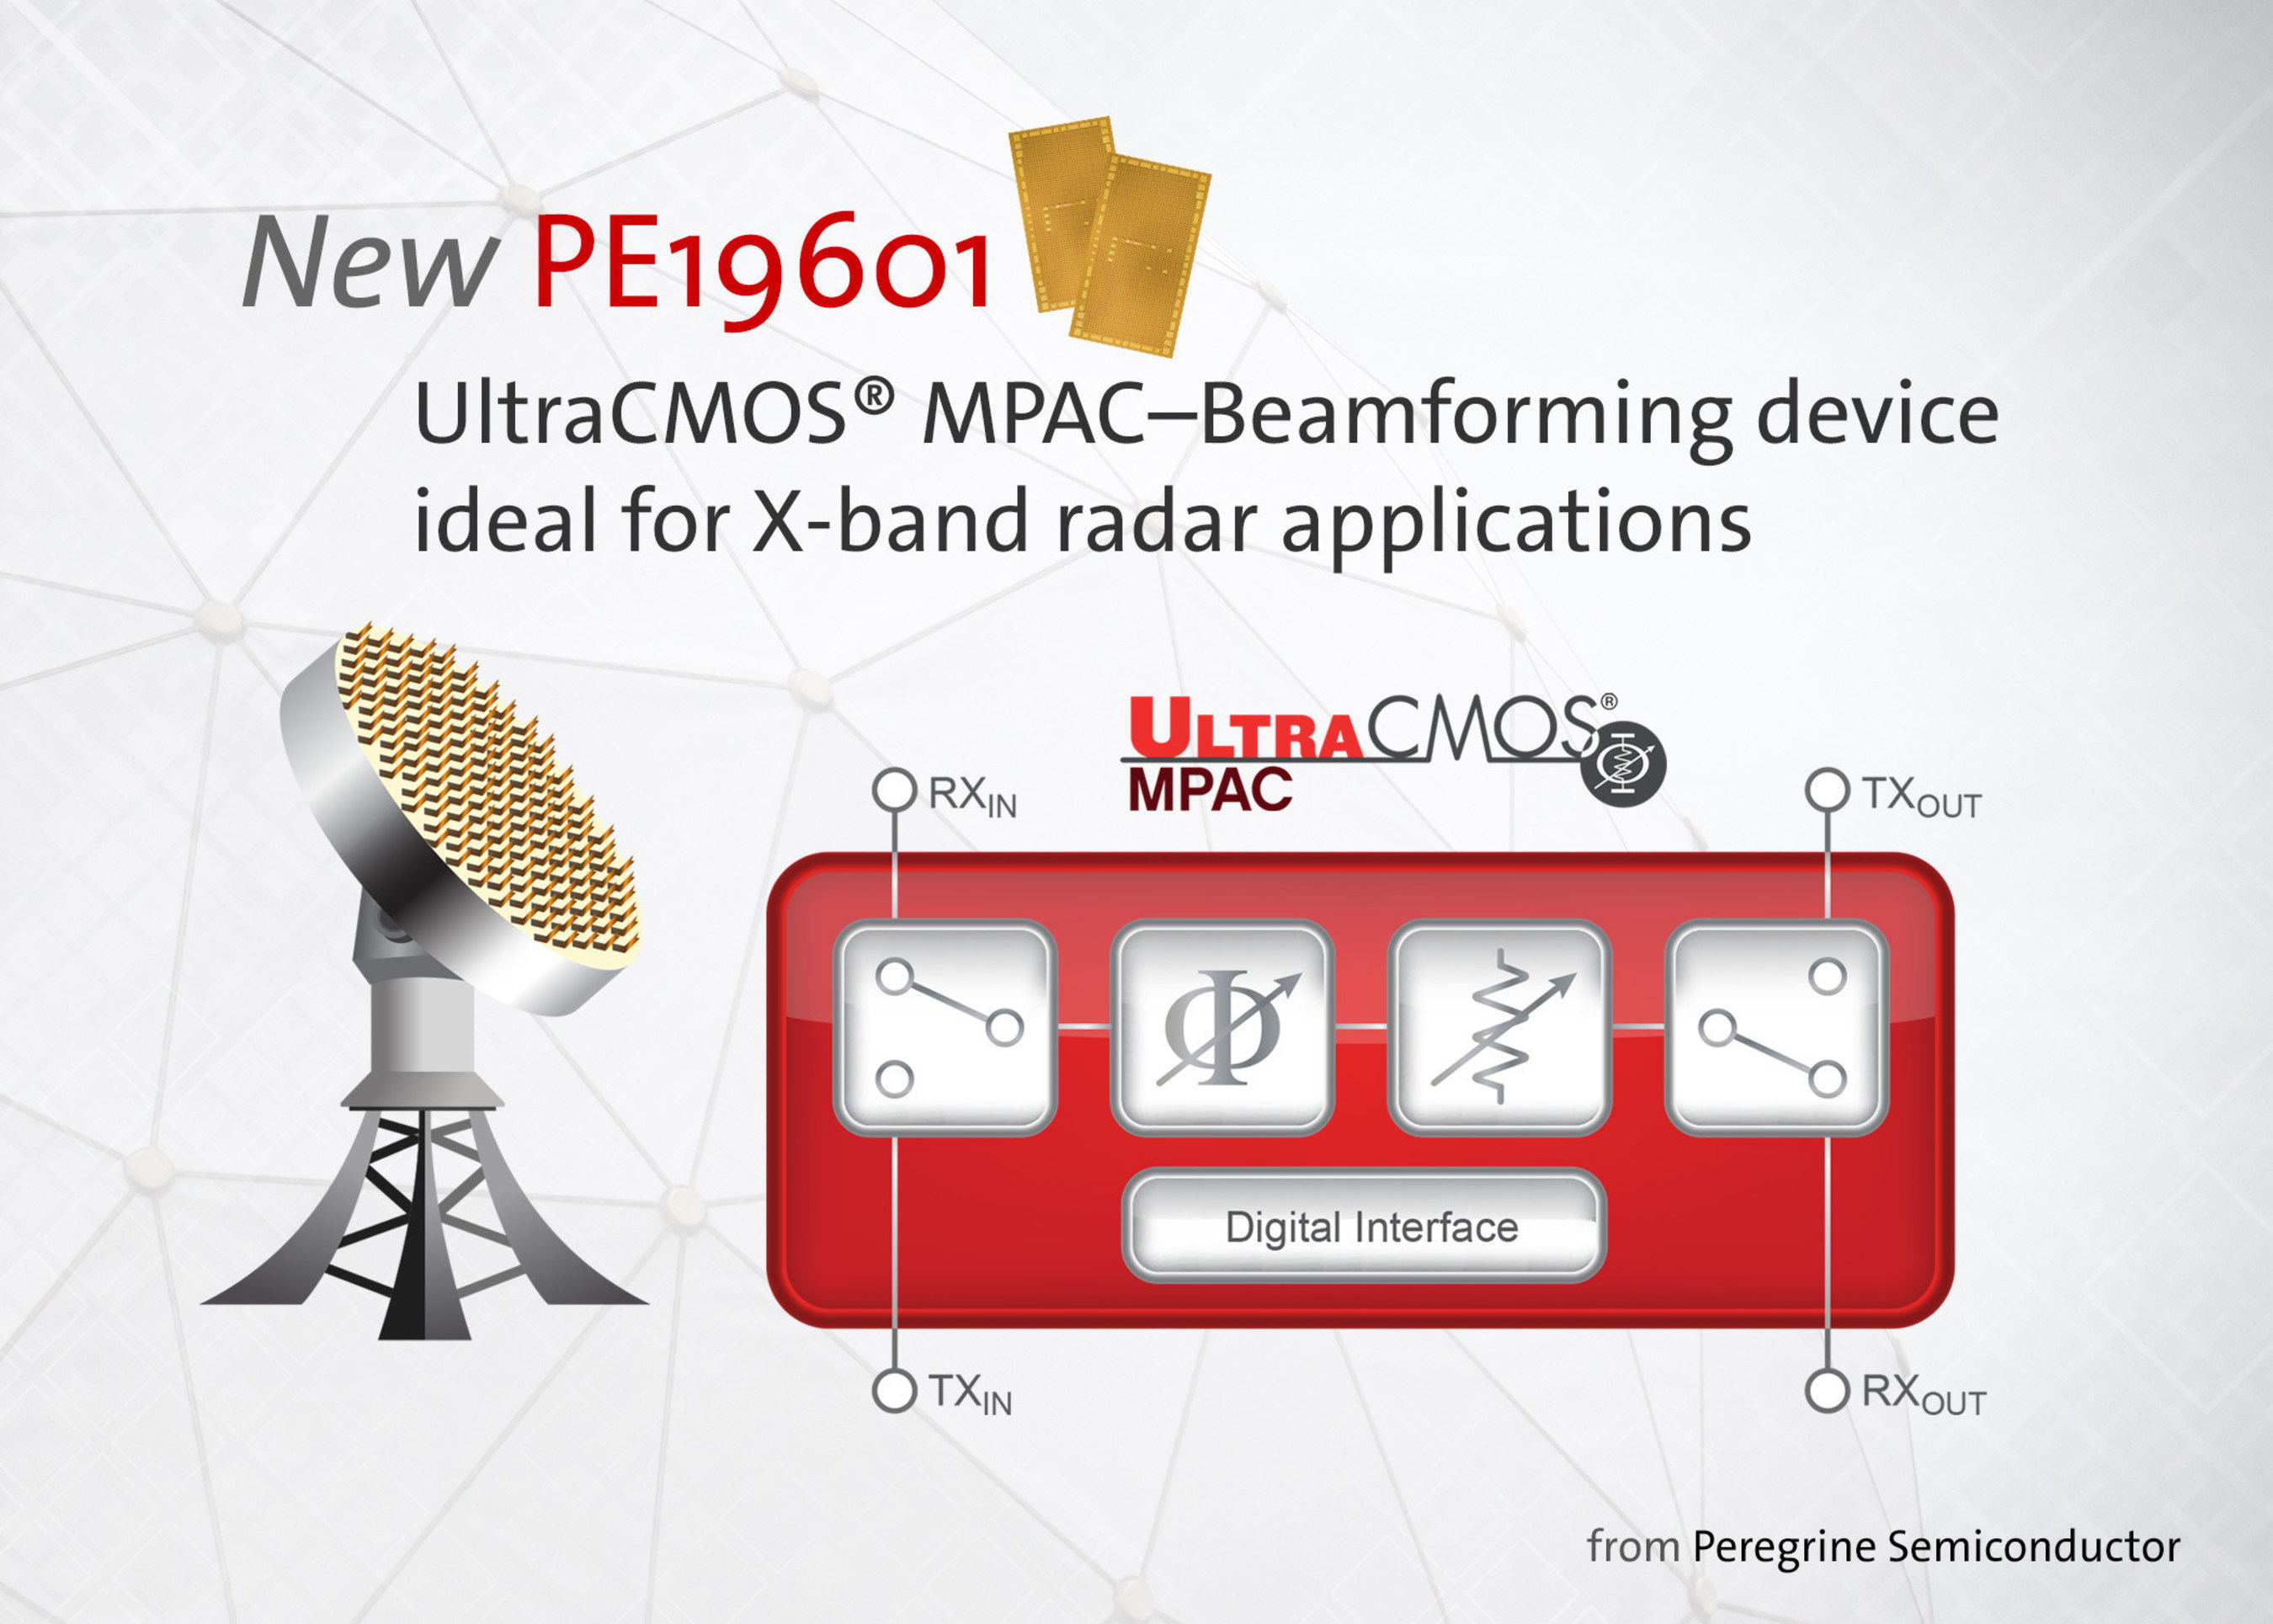 Peregrine Semiconductor broadens their MPAC product family to support high frequency beamforming applications. The UltraCMOS(R) PE19601 MPAC-Beamforming device is ideal for X-band radar.